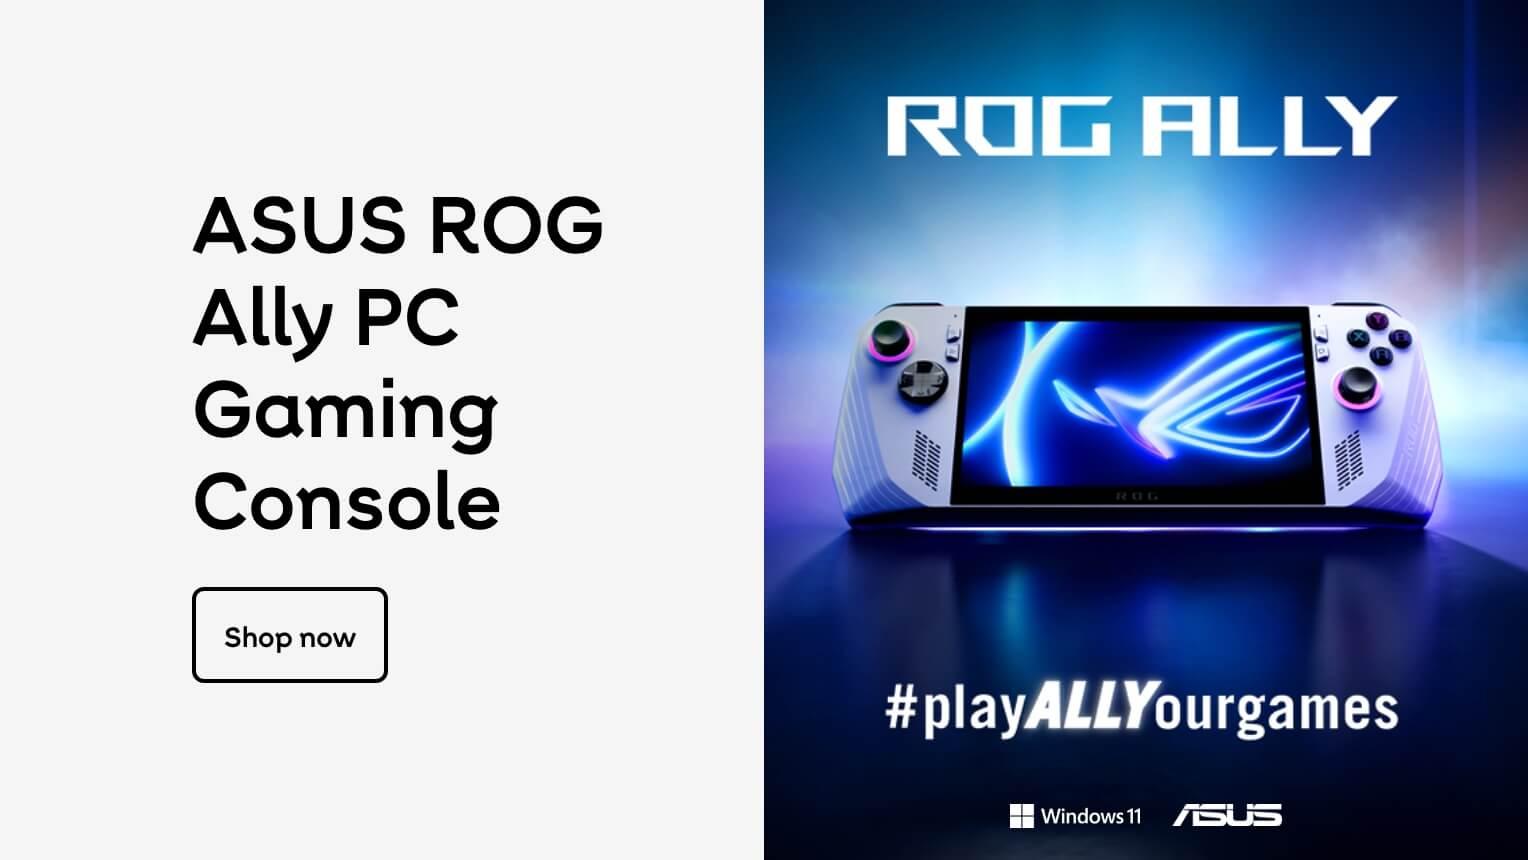 ASUS ROG Ally PC Gaming Console